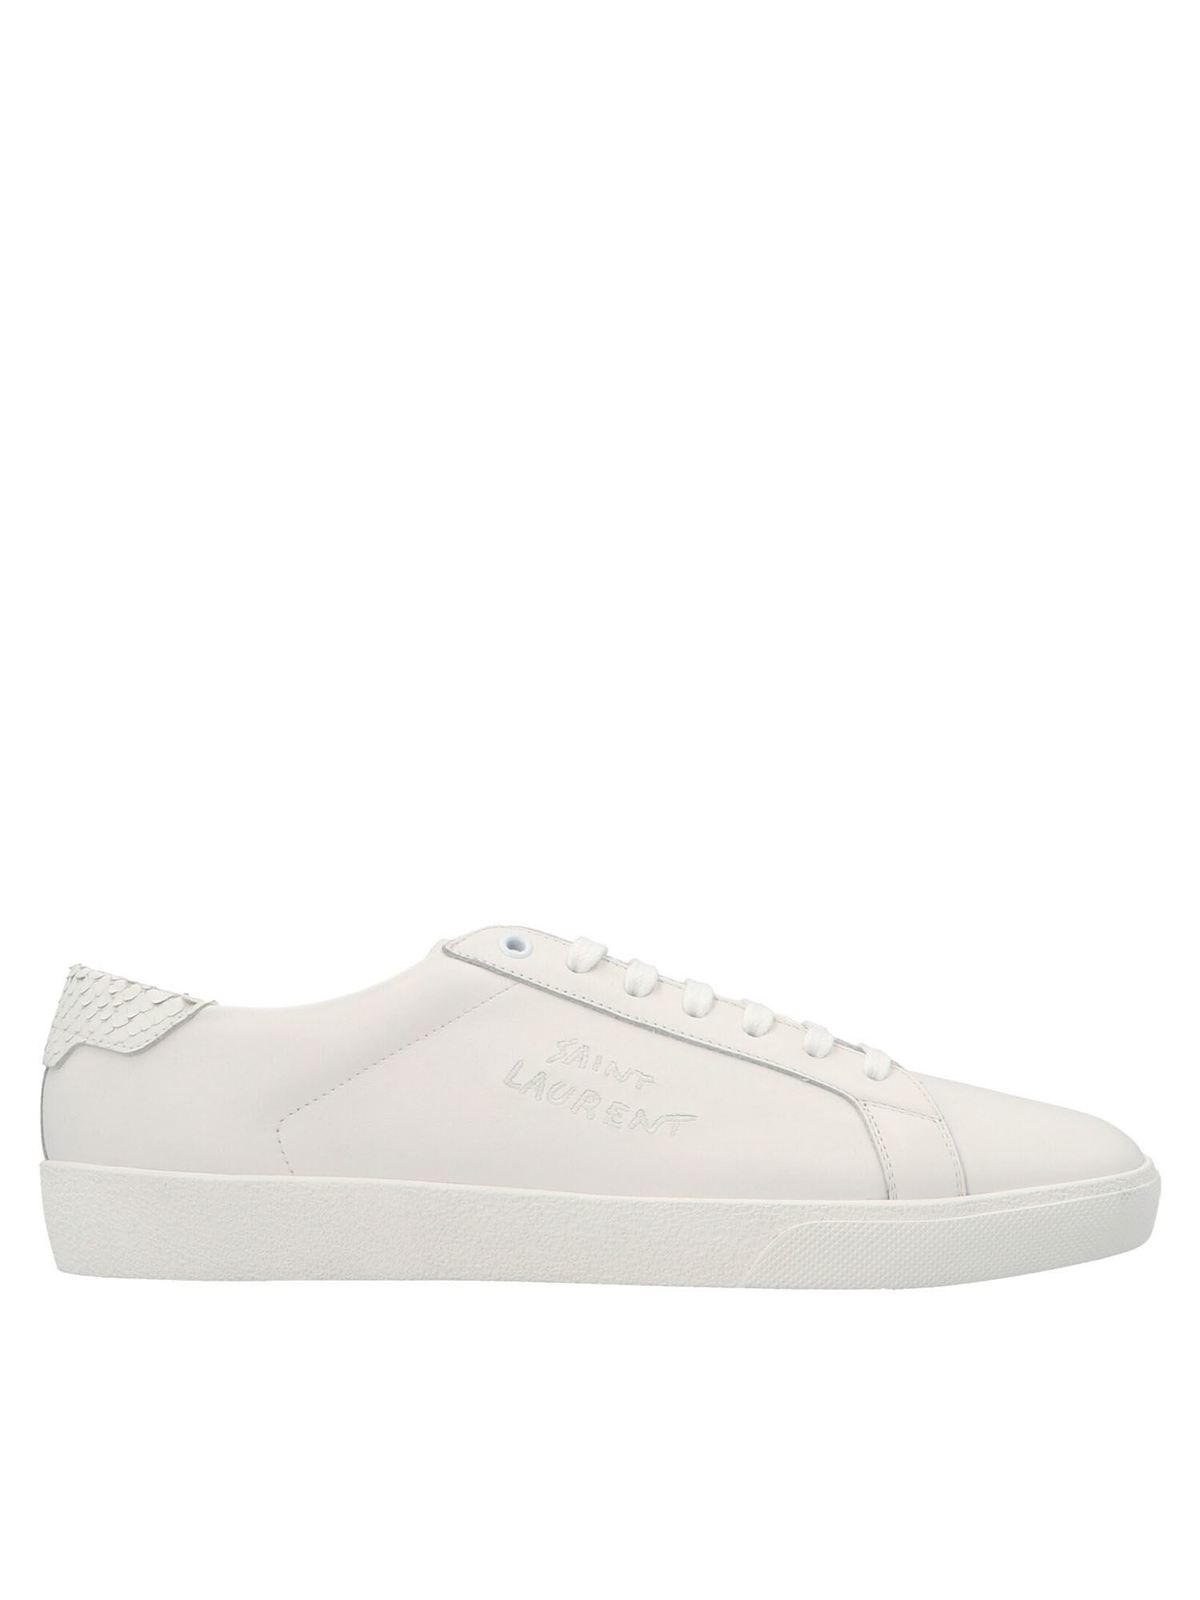 Saint Laurent Leathers COURT CLASSIC SL06 SNEAKERS IN WHITE